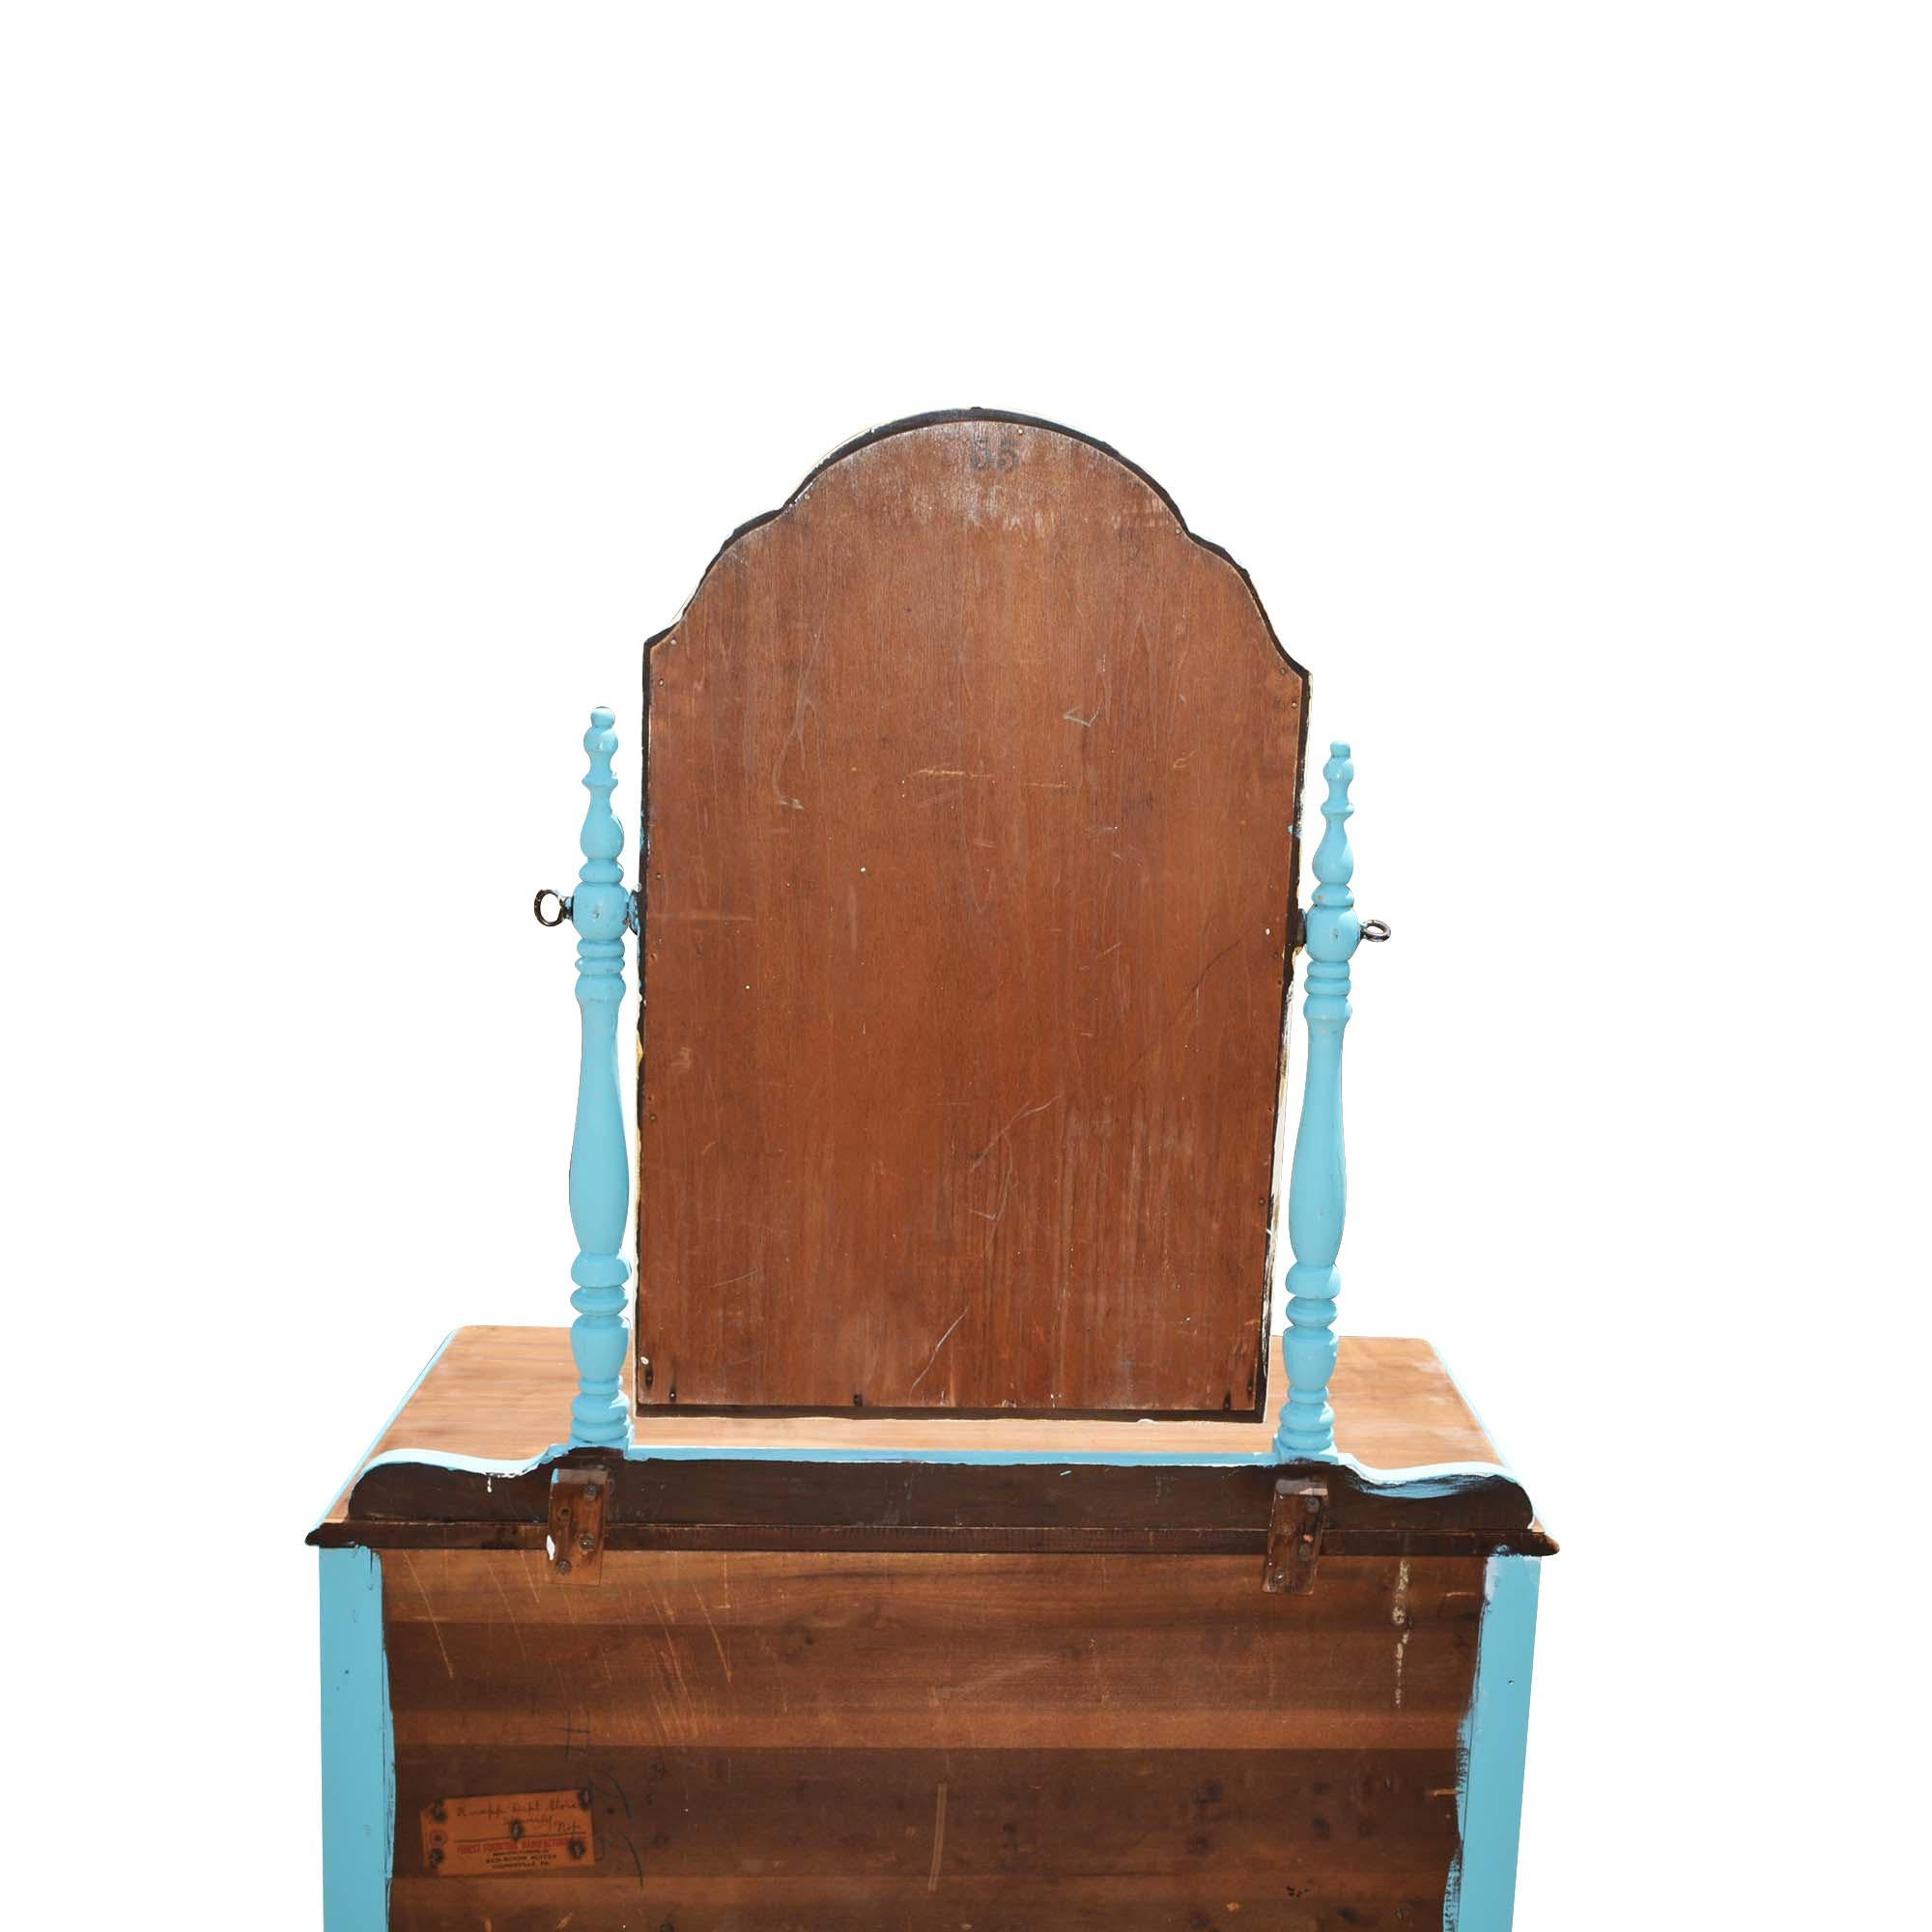 Hand-Painted Painted Wood Makeup Vanity Desk with Mirror and Upholstered Chair